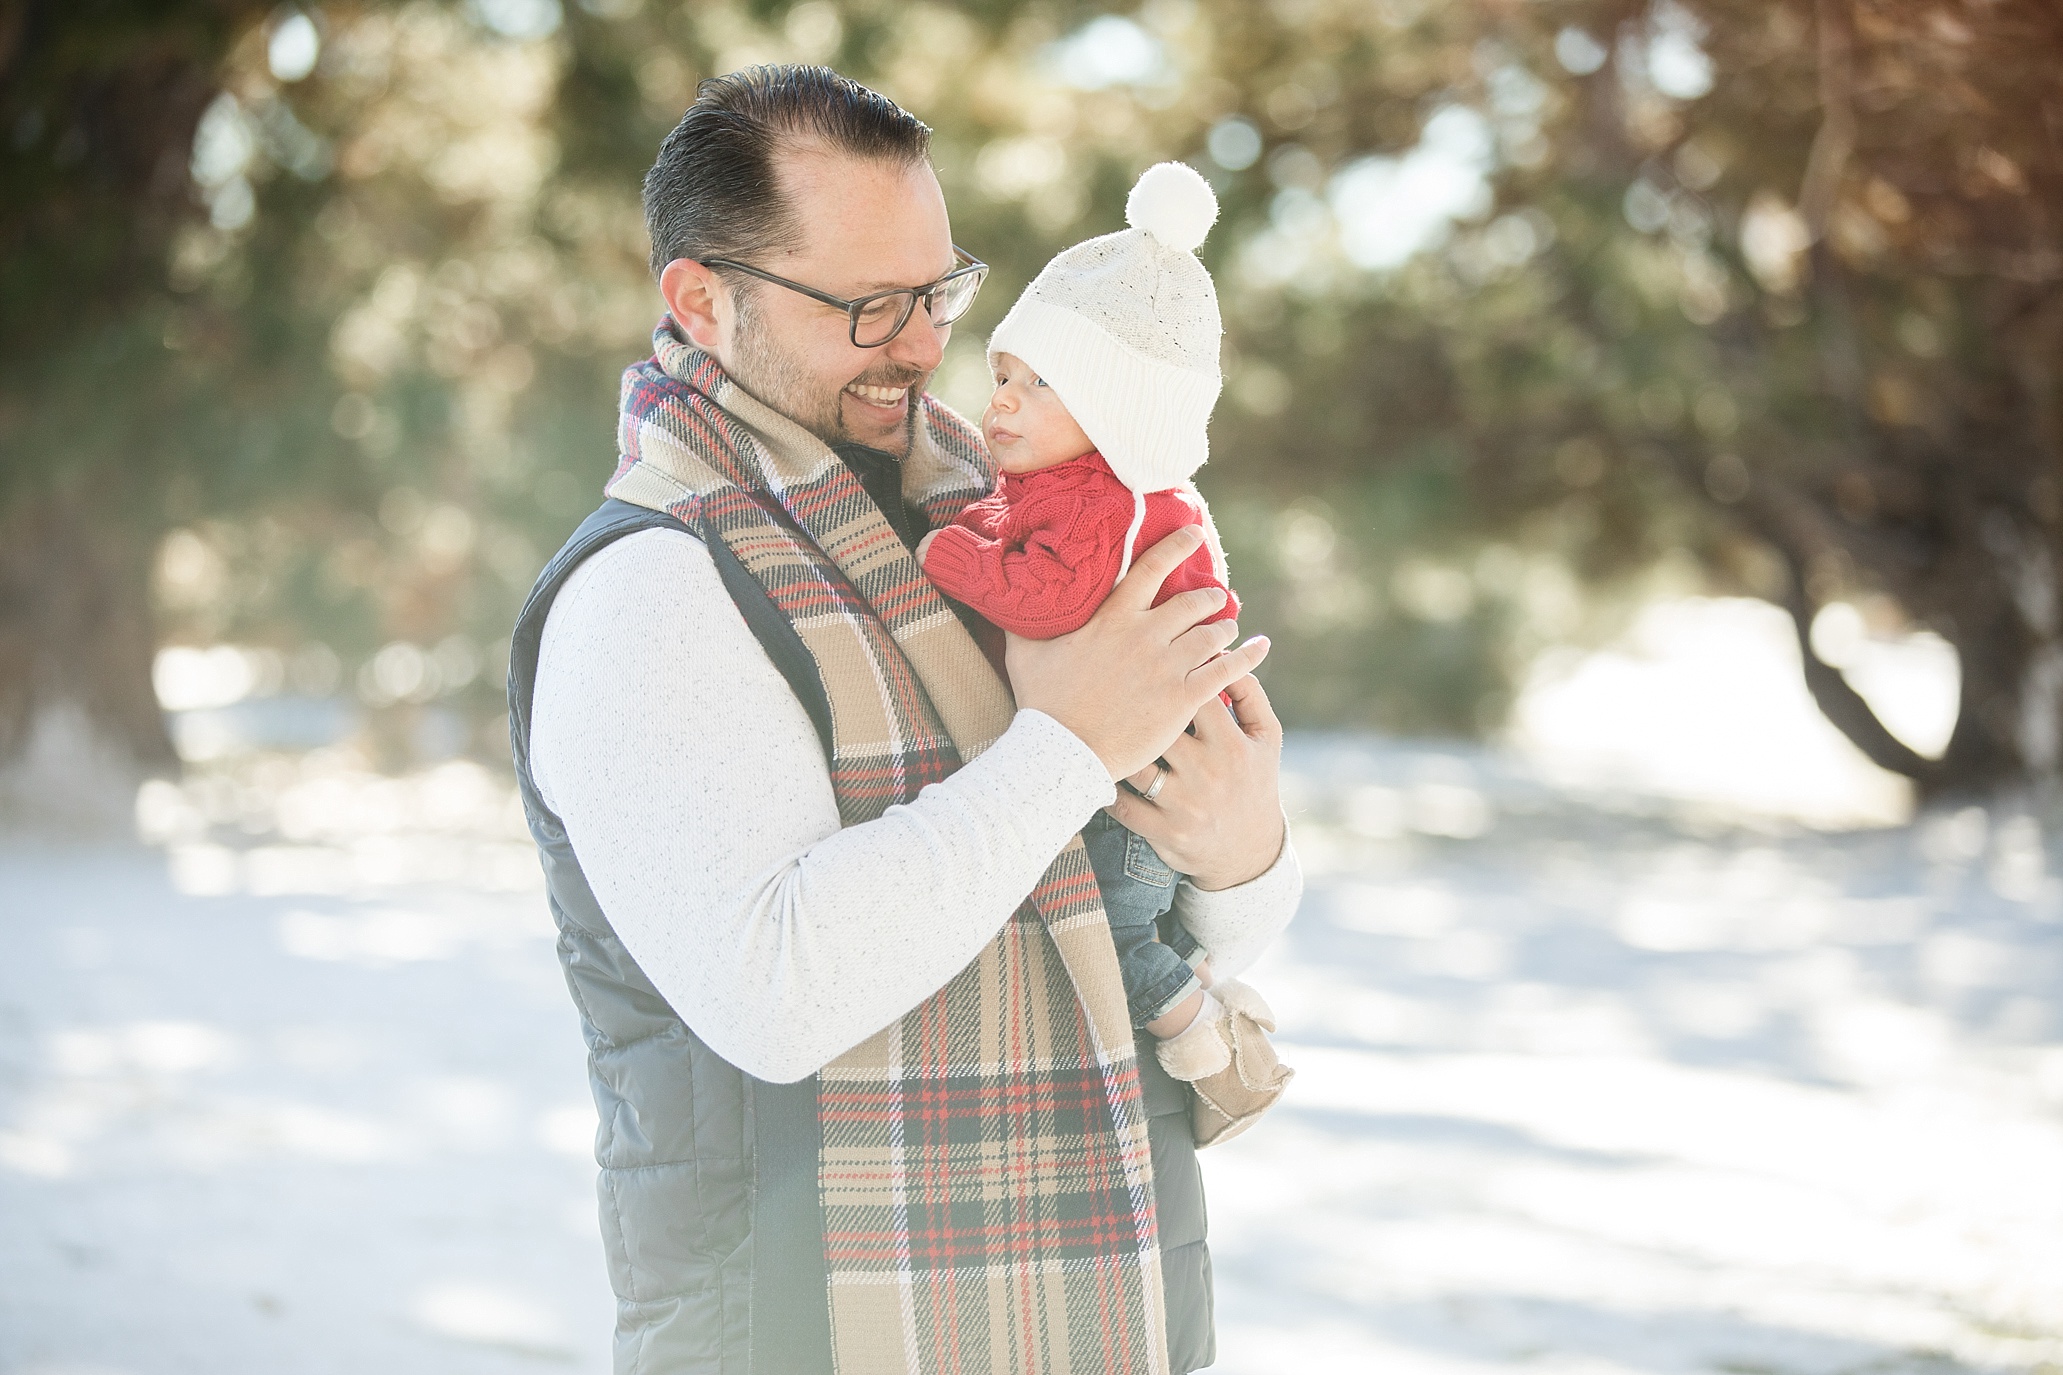 Winter Family Photo session with dog Christmas card photos what to wear